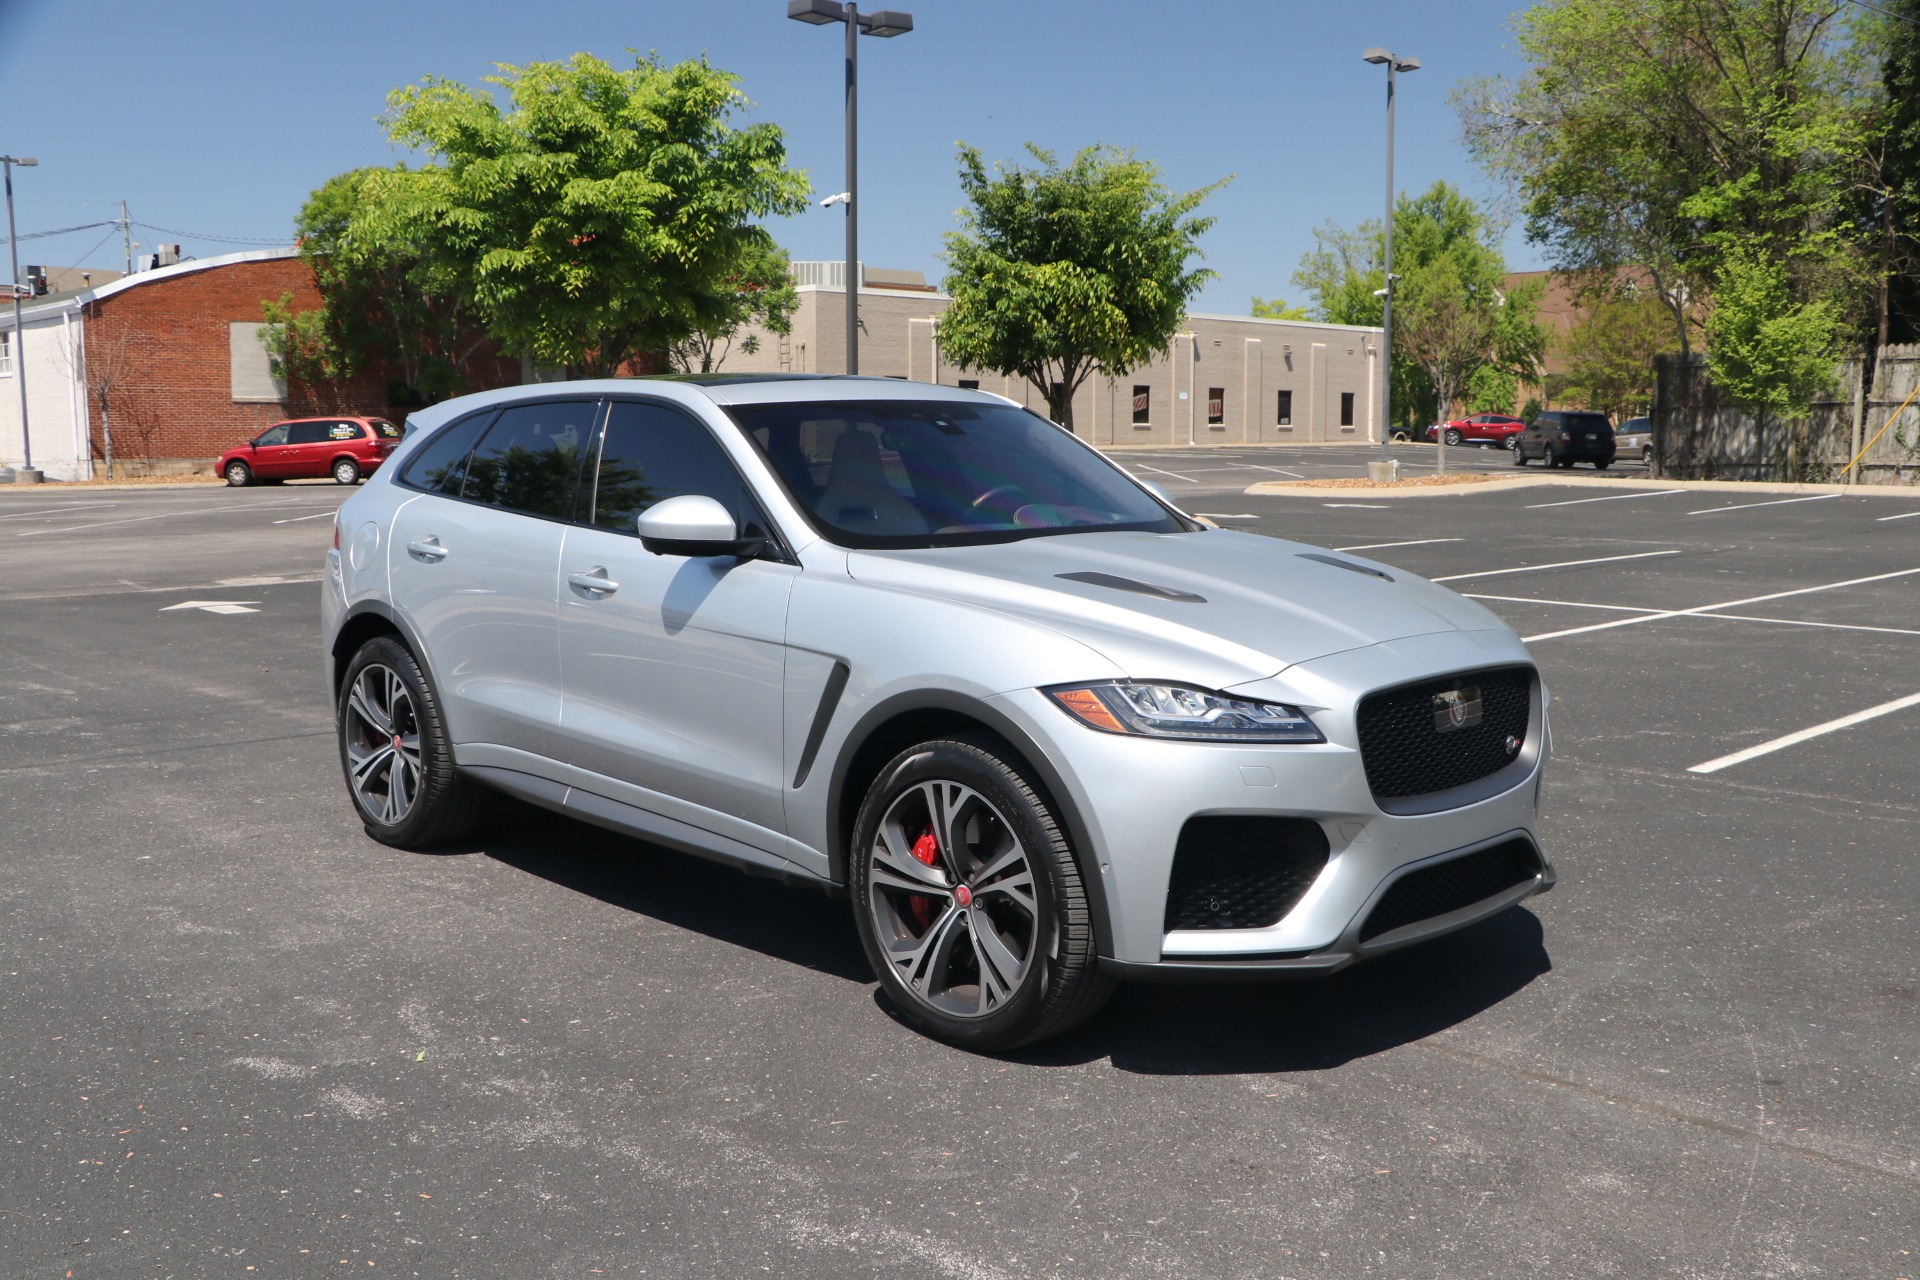 Used Jaguar F Pace Svr Luxury Awd W Nav For Sale 74 950 Auto Collection Stock